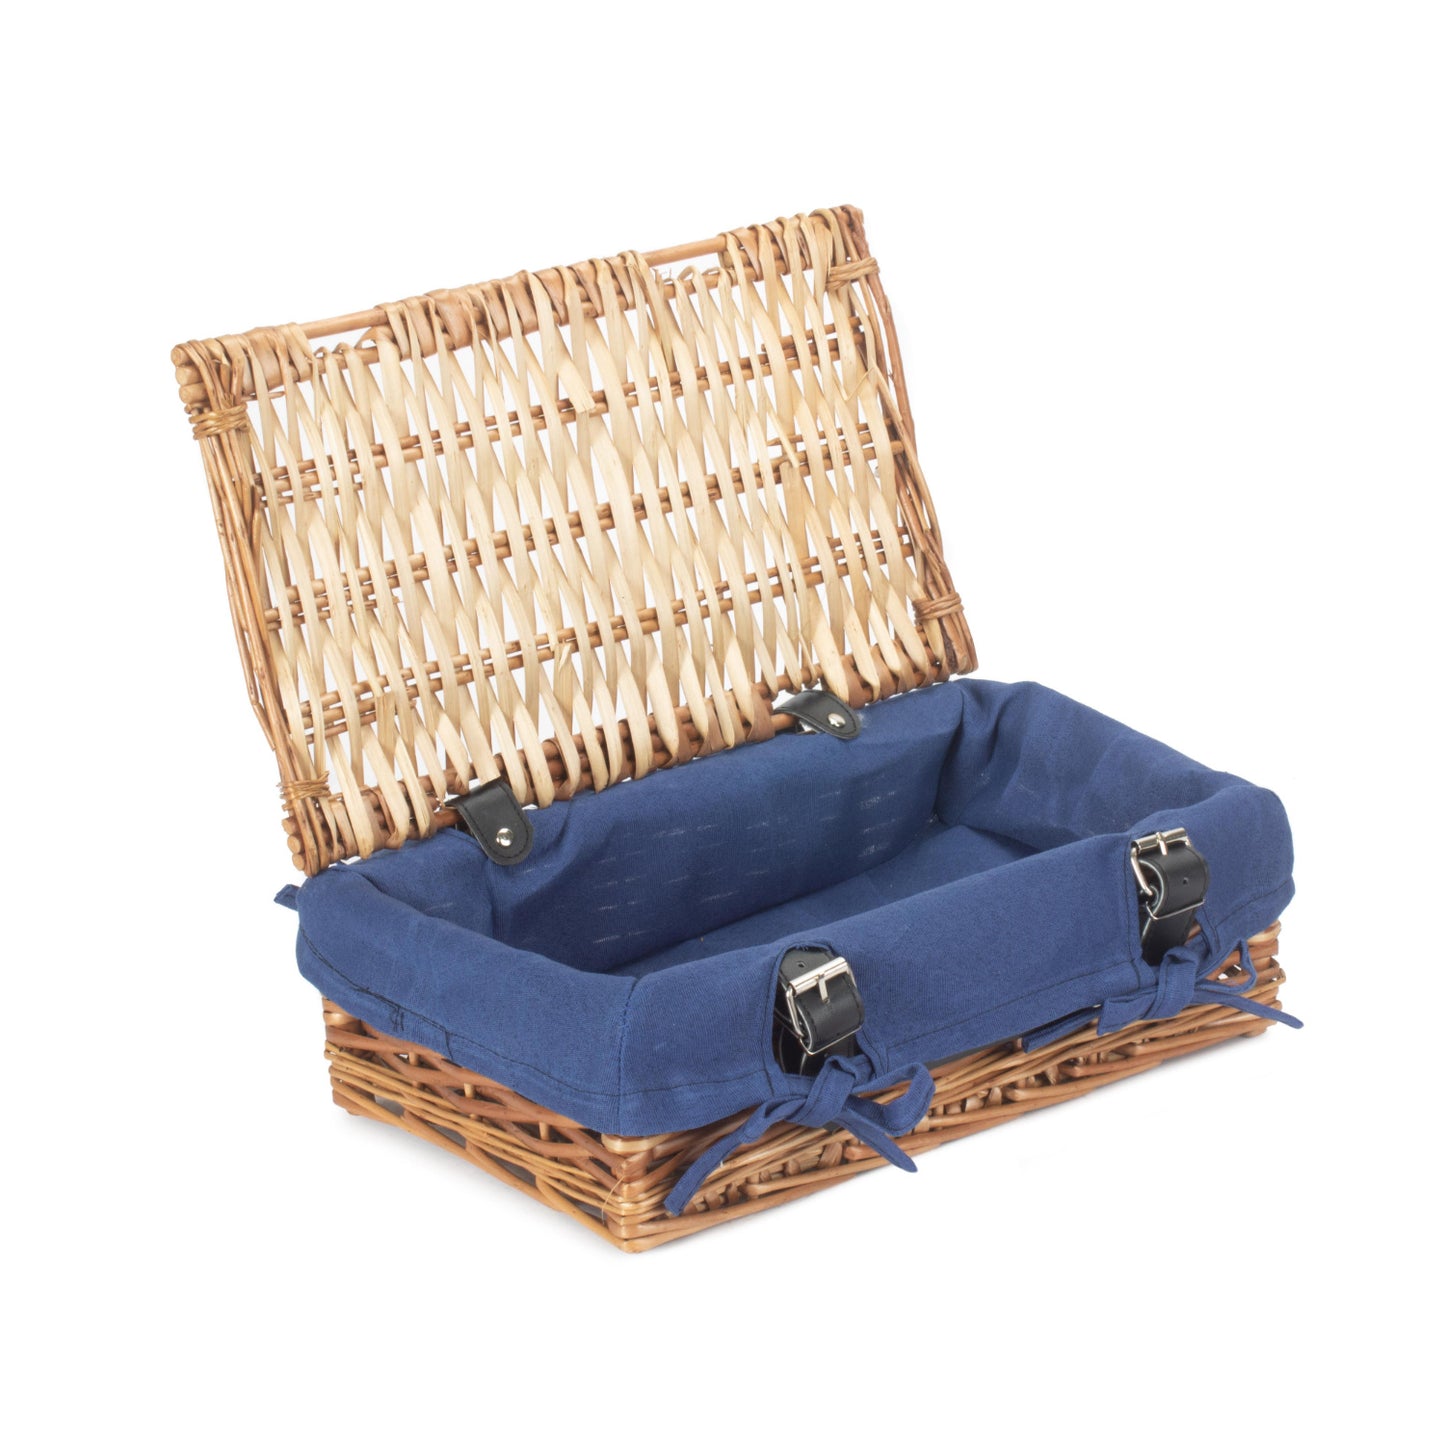 14 Inch Small Packaging Hamper With Navy Blue Lining